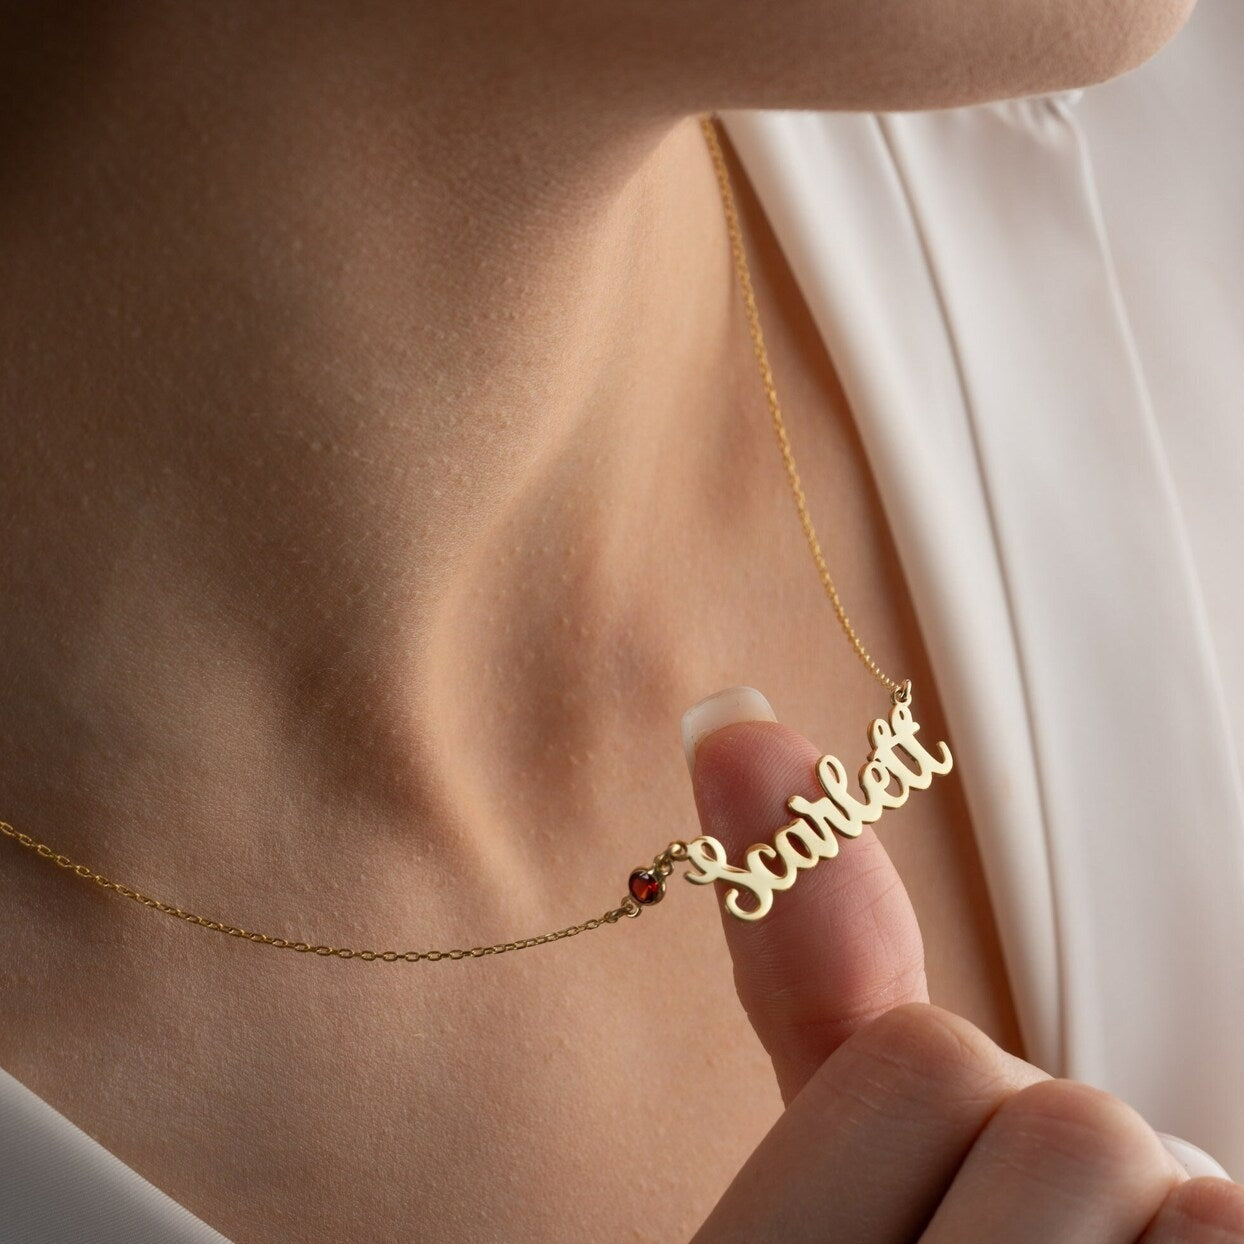 Alphabet name gold necklaces - 18 carat gold. Handcrafted in Dubai, United Arab Emirates. Fast delivery. Shop the highest quality gold gifts and birthday gifts for her.